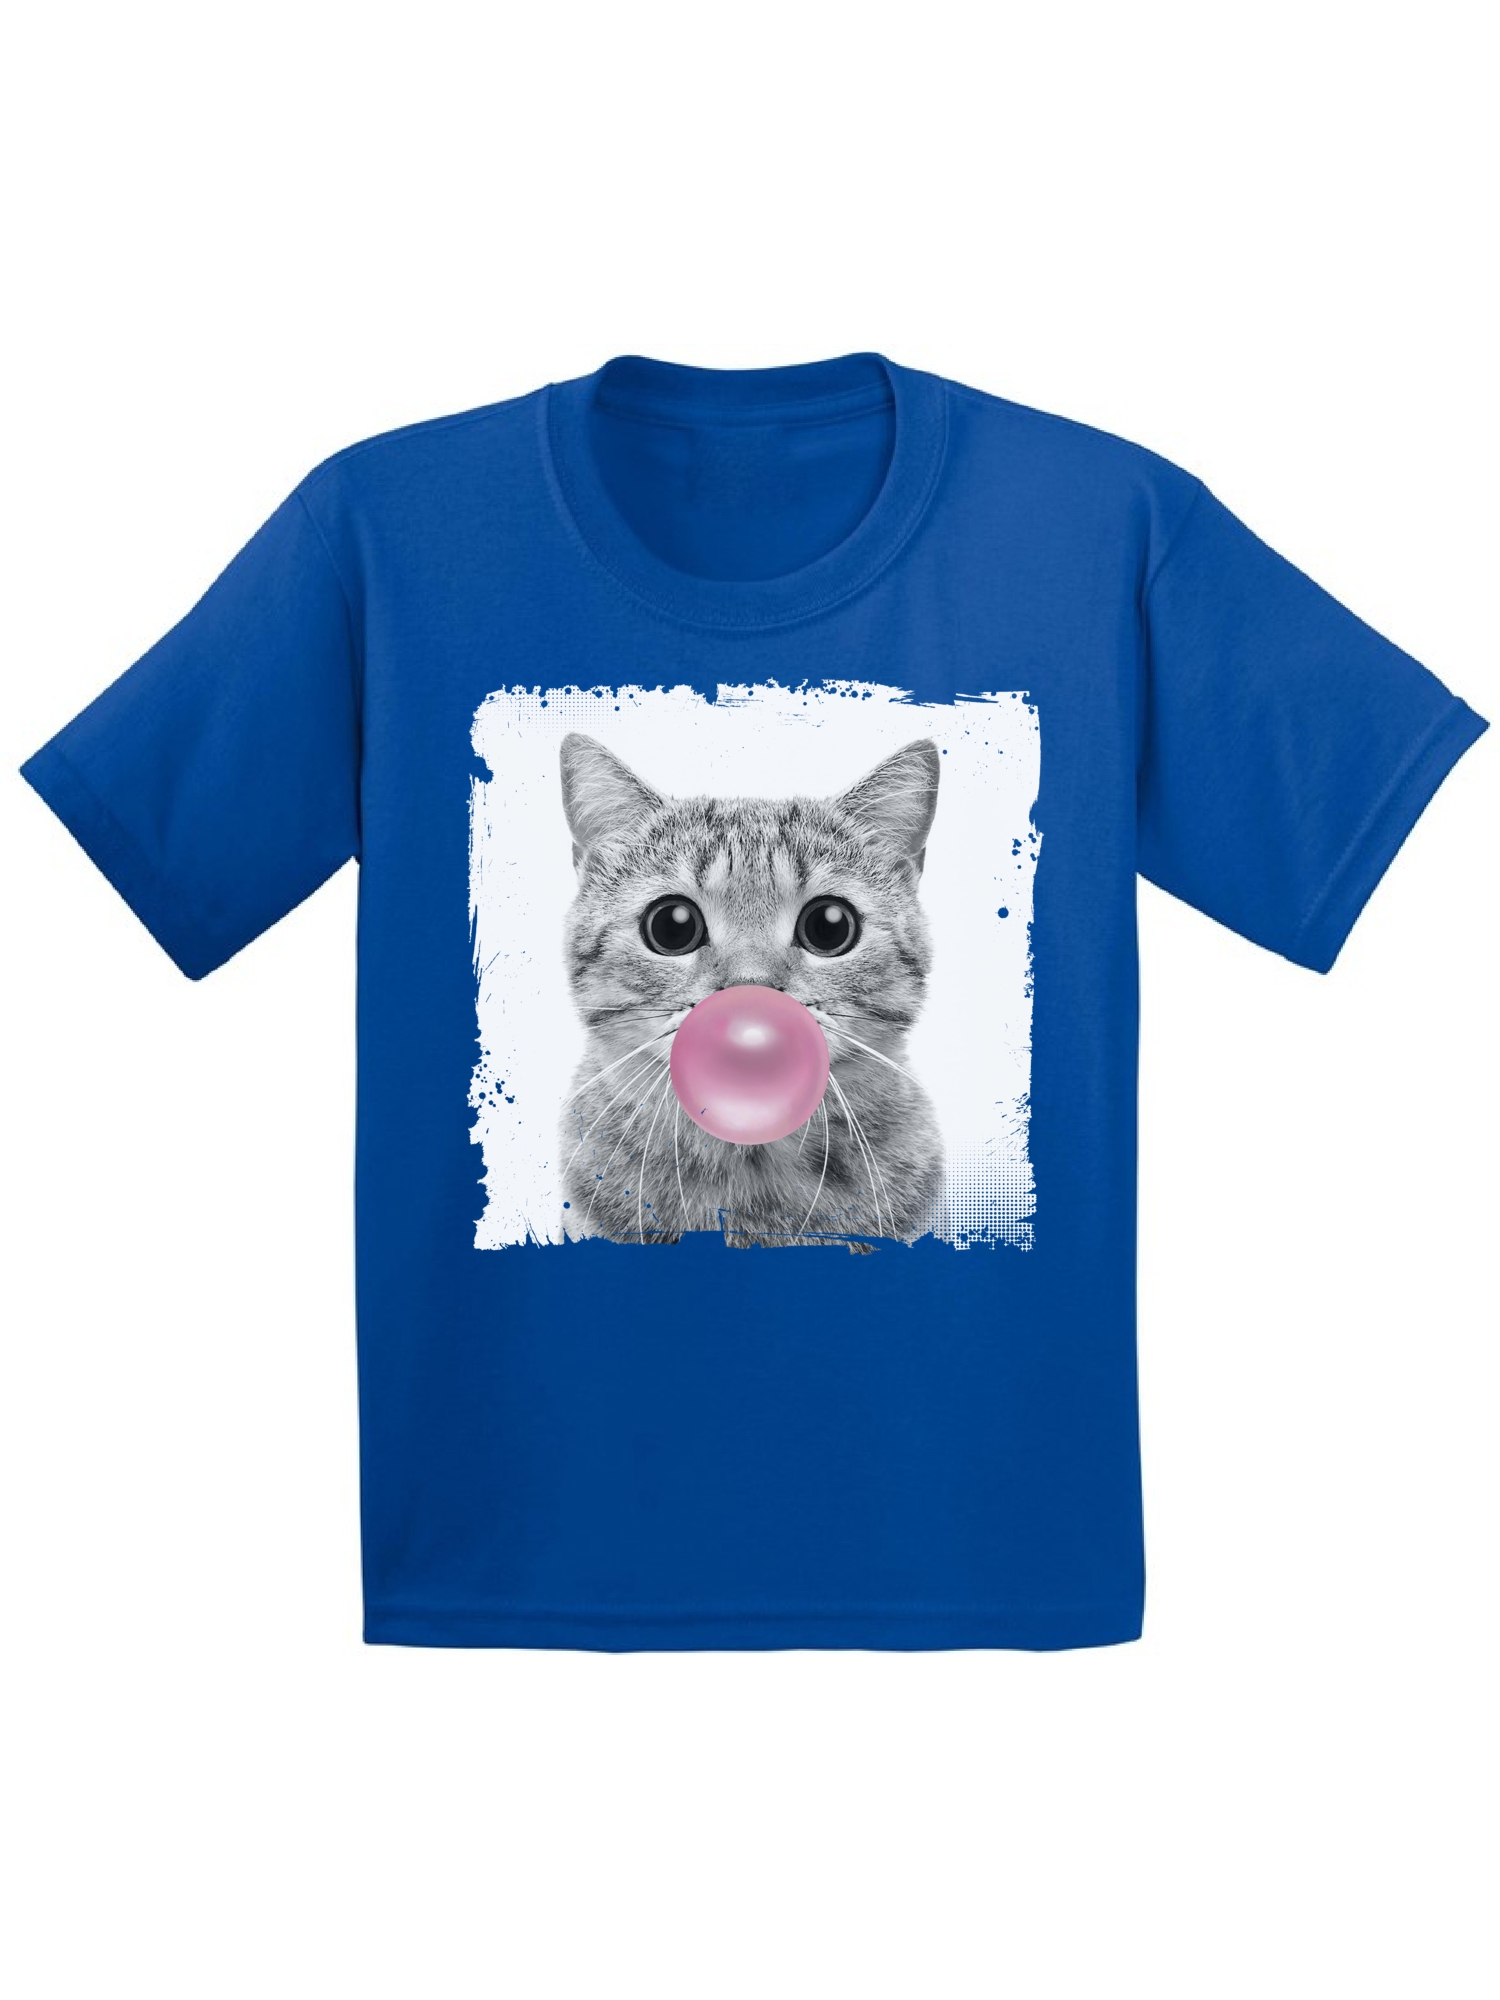 Awkward Styles Funny Cat Blowing Gum Shirt Cat Lovers Lovely Gifts for Kids Funny Animal Youth Shirt Cute Animal Lovers Clothes New Kids T Shirt Gifts for Kids Little Cat Clothing Childrens Outfit - image 1 of 4